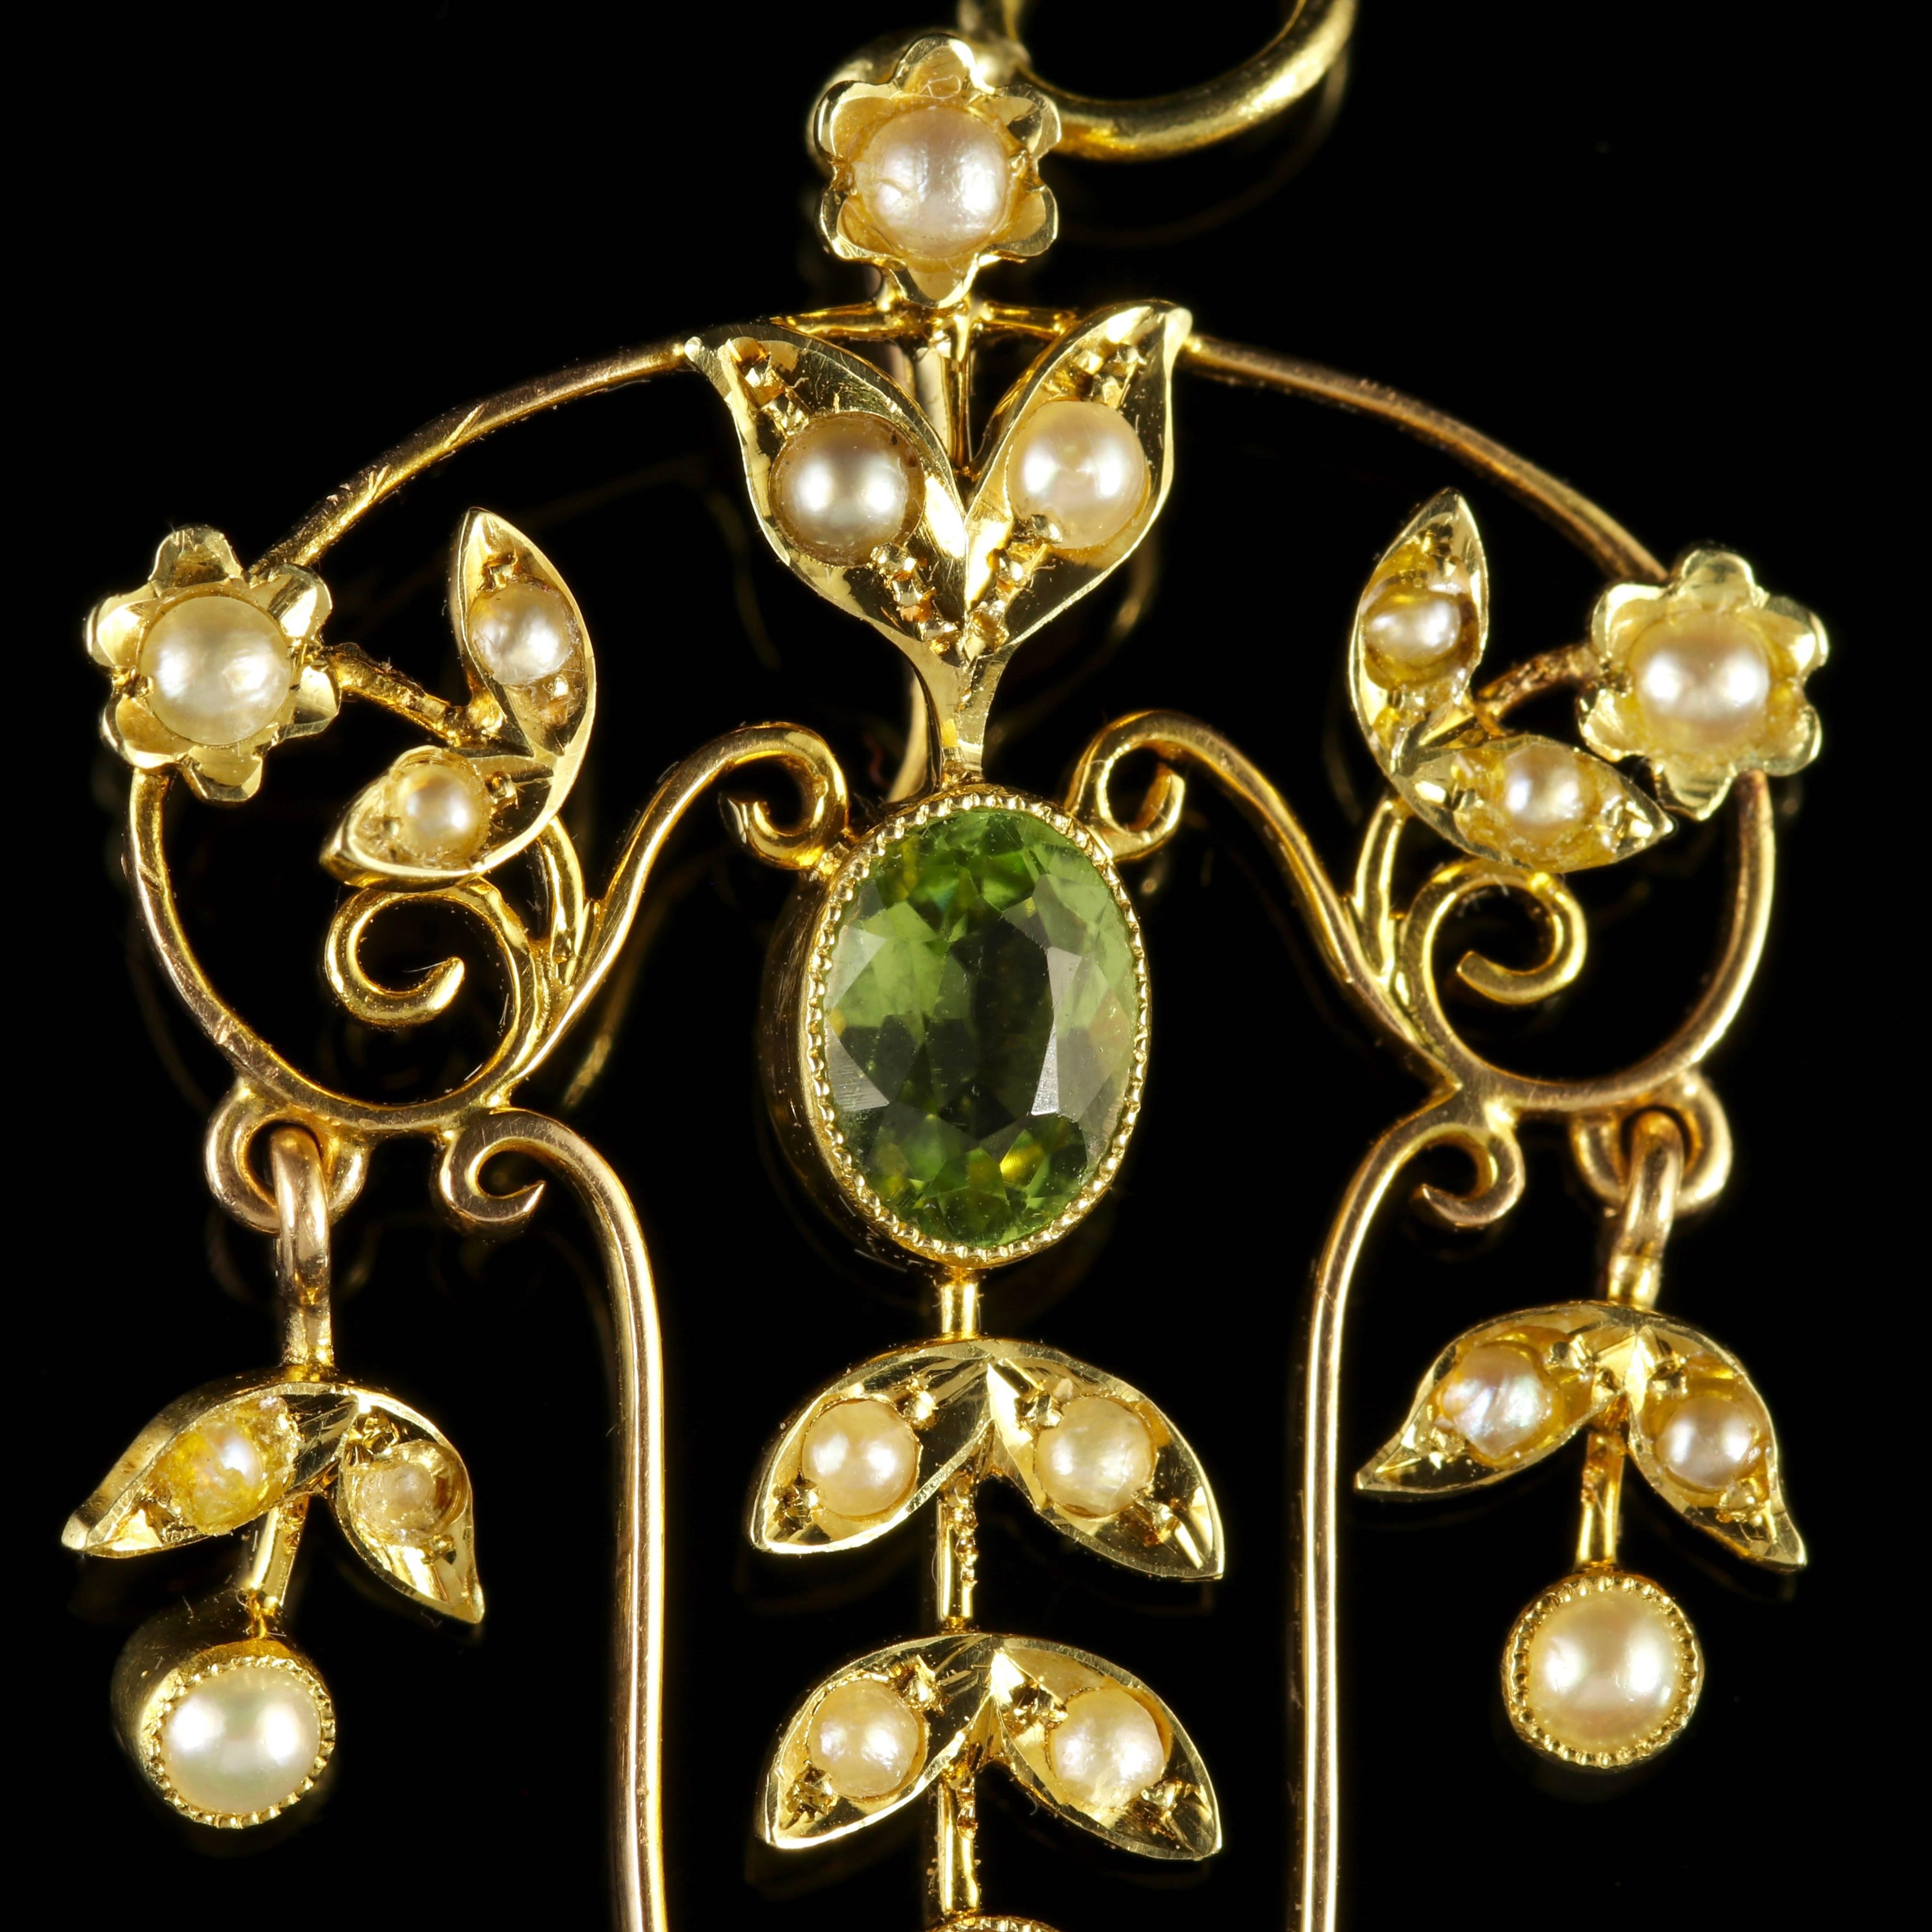 This fabulous Victorian Suffragette pendant is Circa 1900.

Suffragettes liked to be depicted as feminine, their jewellery was chosen to counter the stereotypes put forward by opponents that they were mannish or shrieking!

Green is for give, white